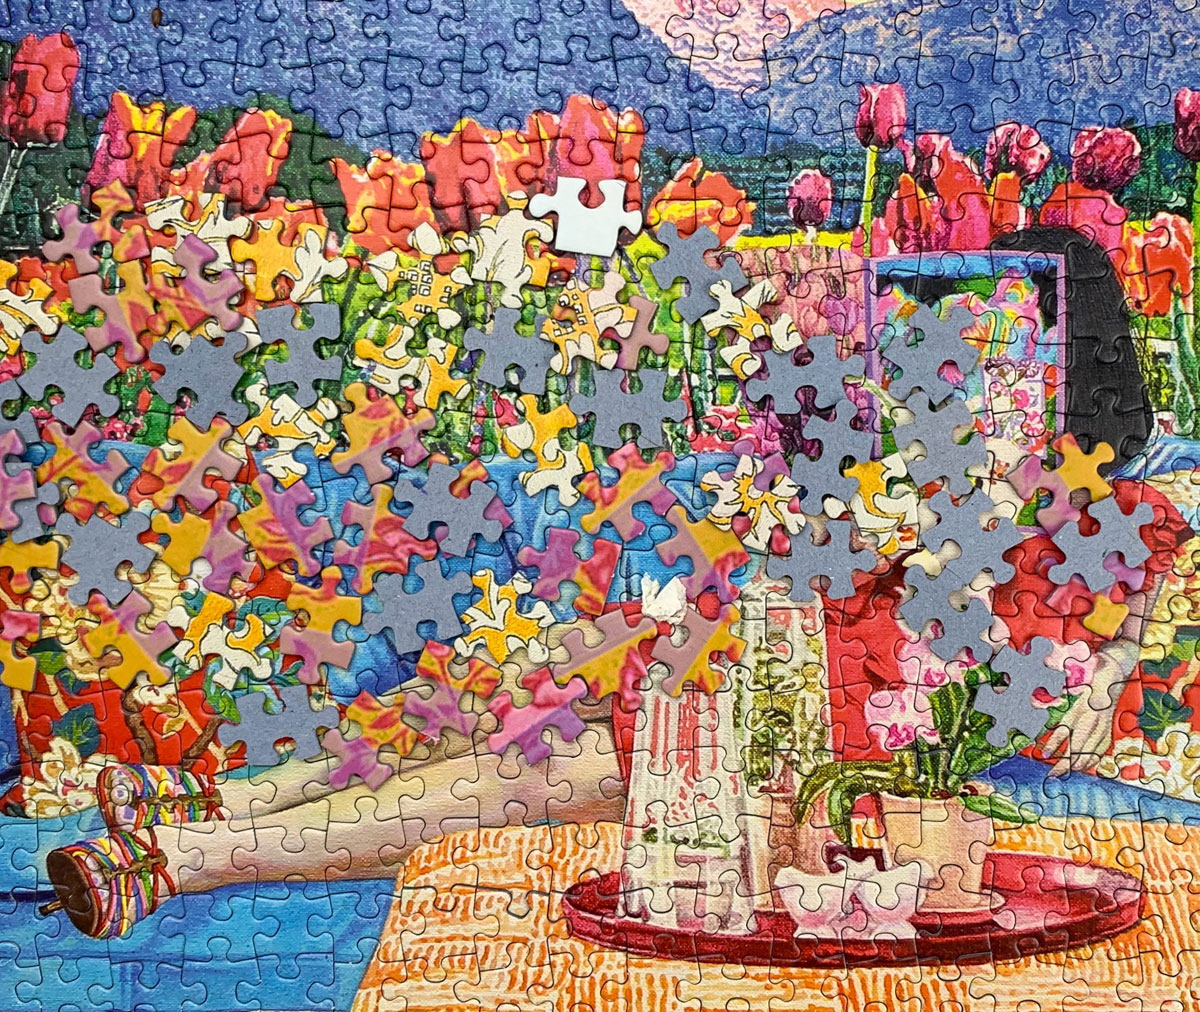 Some studies claim that jigsaw puzzles can actually help to prevent Alzheimer's